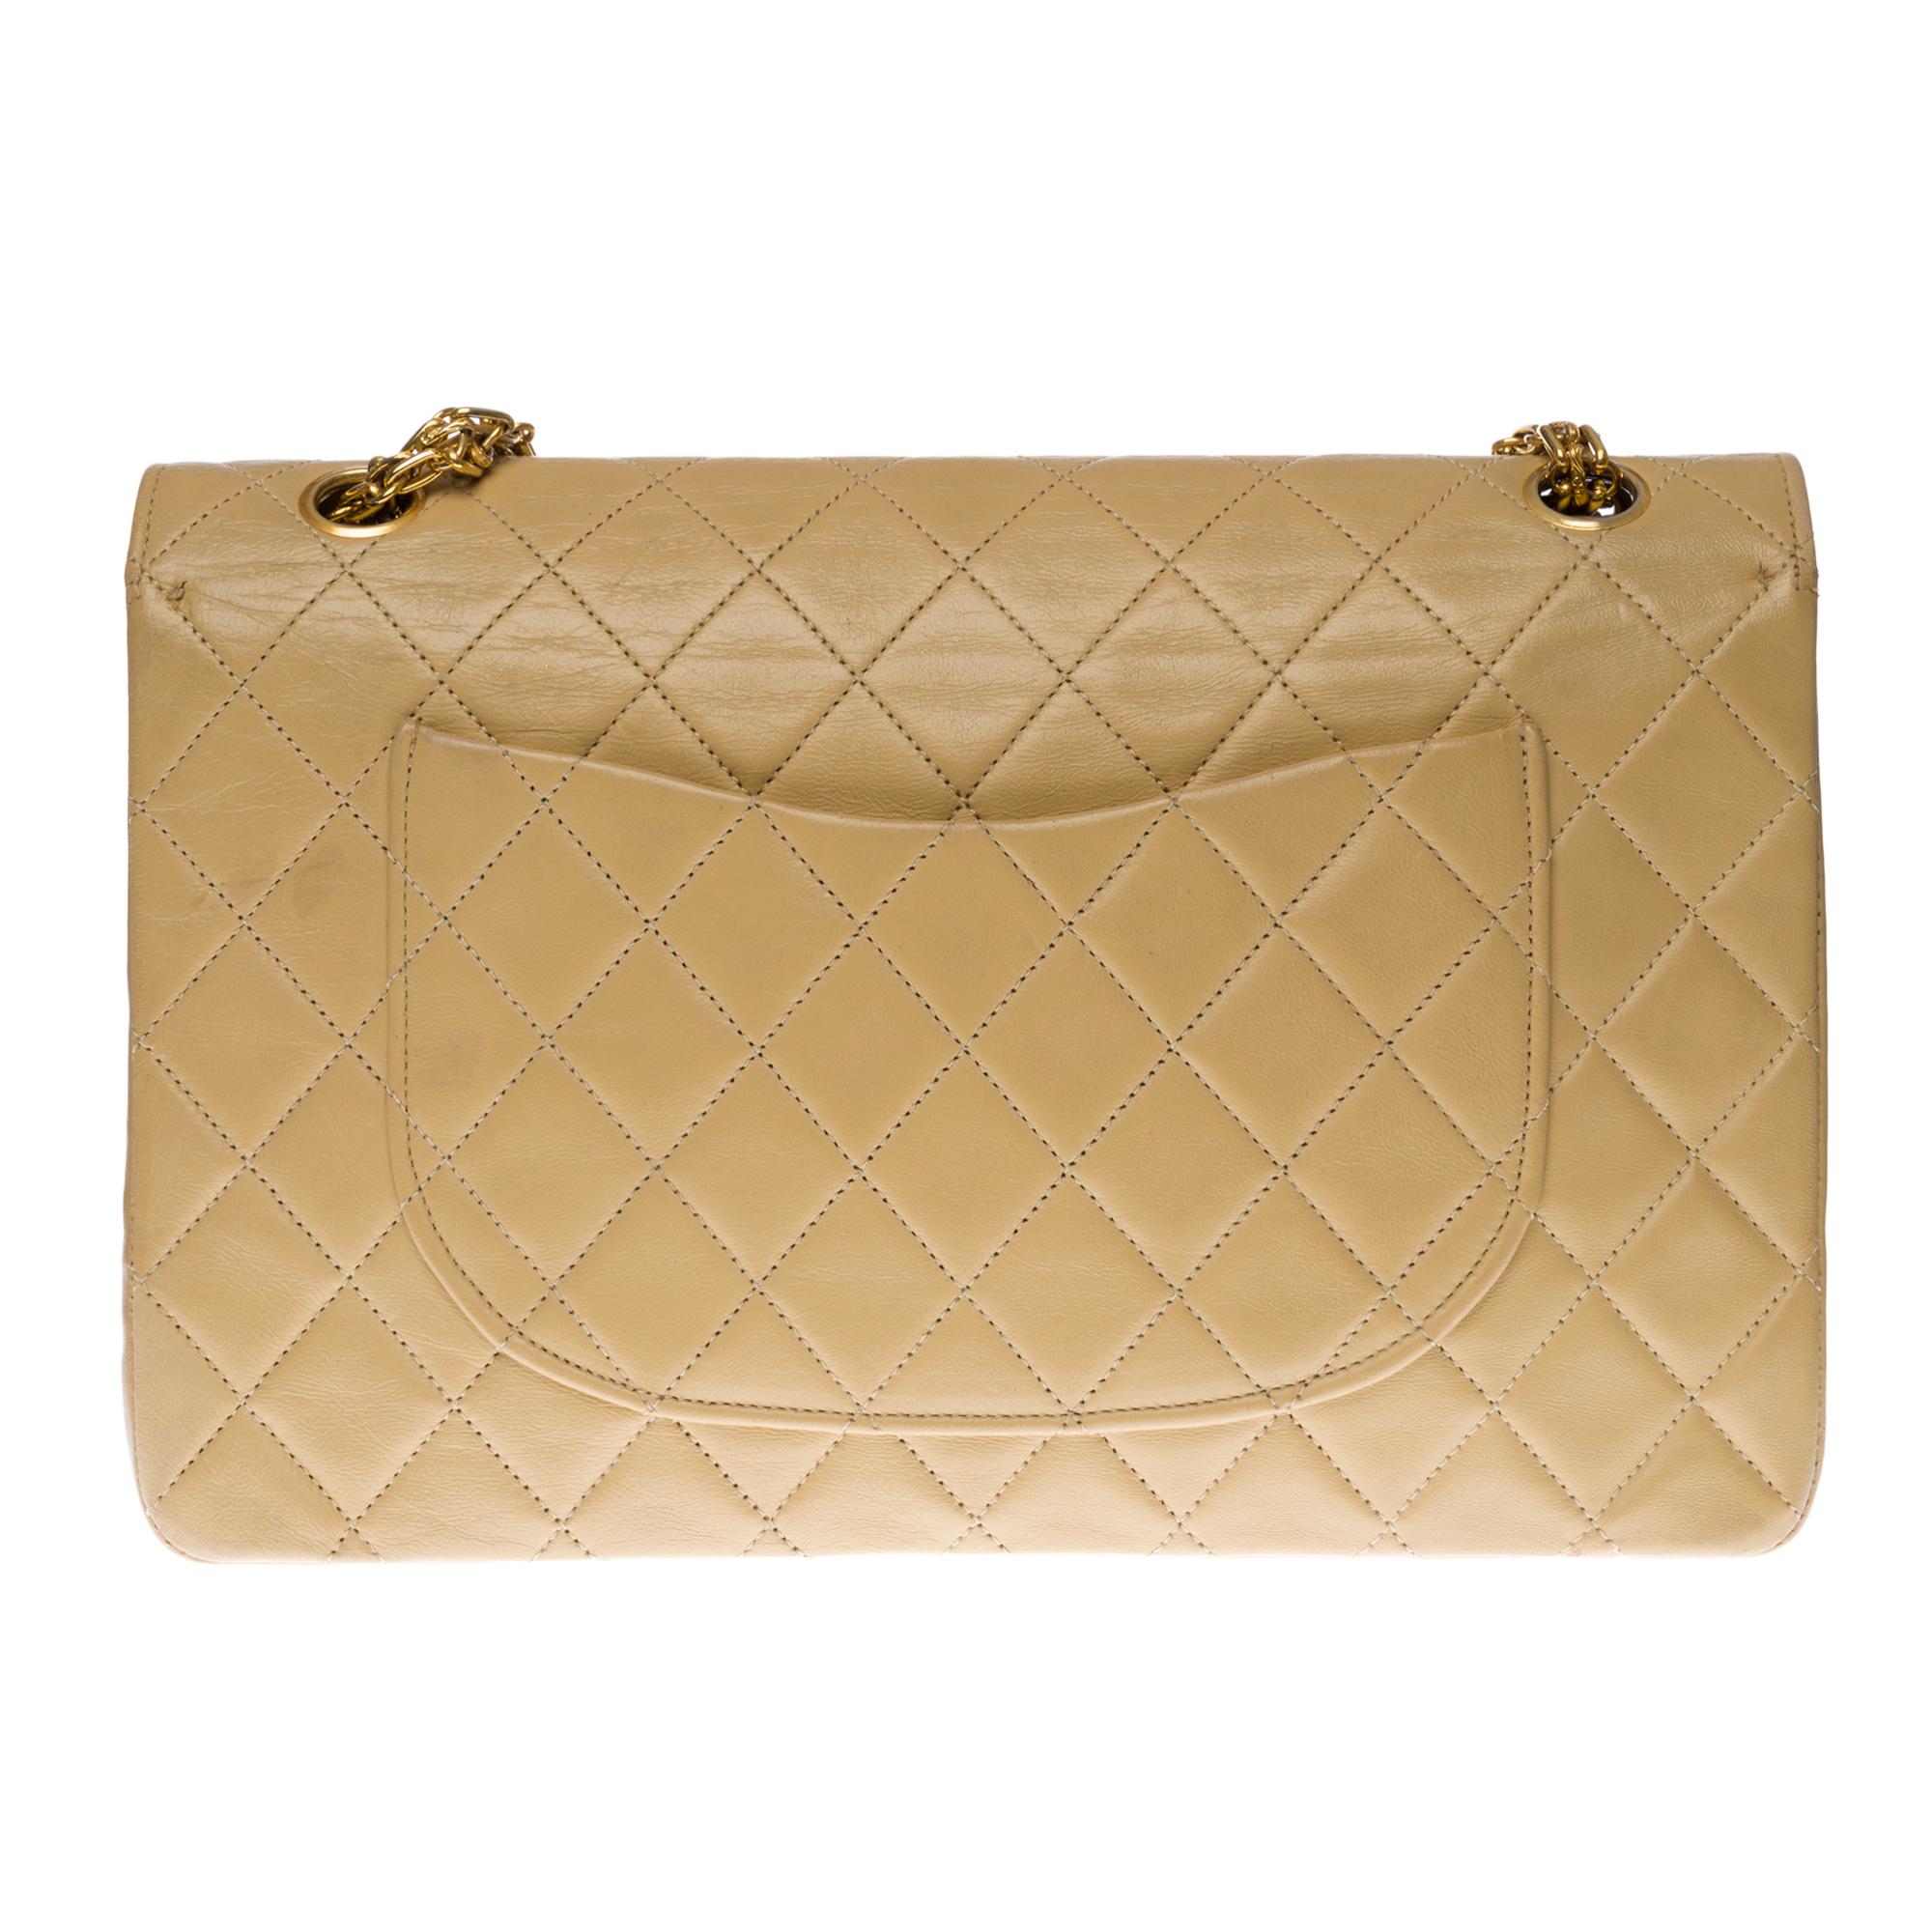 Splendid Chanel Timeless/Classique handbag with double flap in beige quilted lambskin, hardware in gold metal, one Mademoiselle chain strap in gold metal allowing the bag to be worn in the hand or on the shoulder

One patch pocket on the back of the